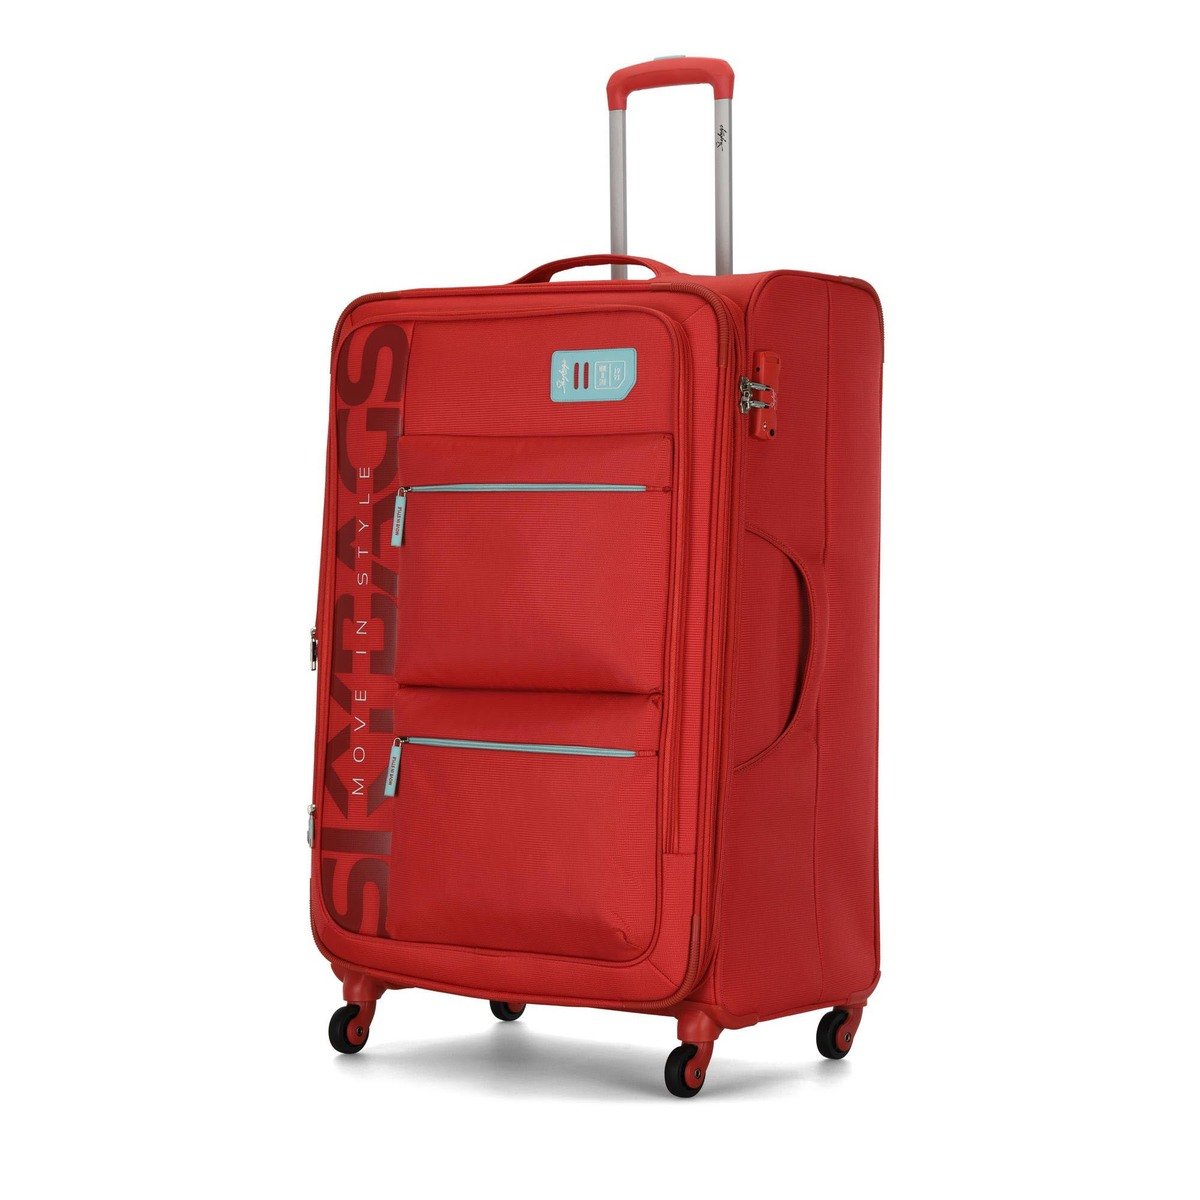 Skybags Vanguard 4 Wheel Soft Trolley, 82 cm, Coral